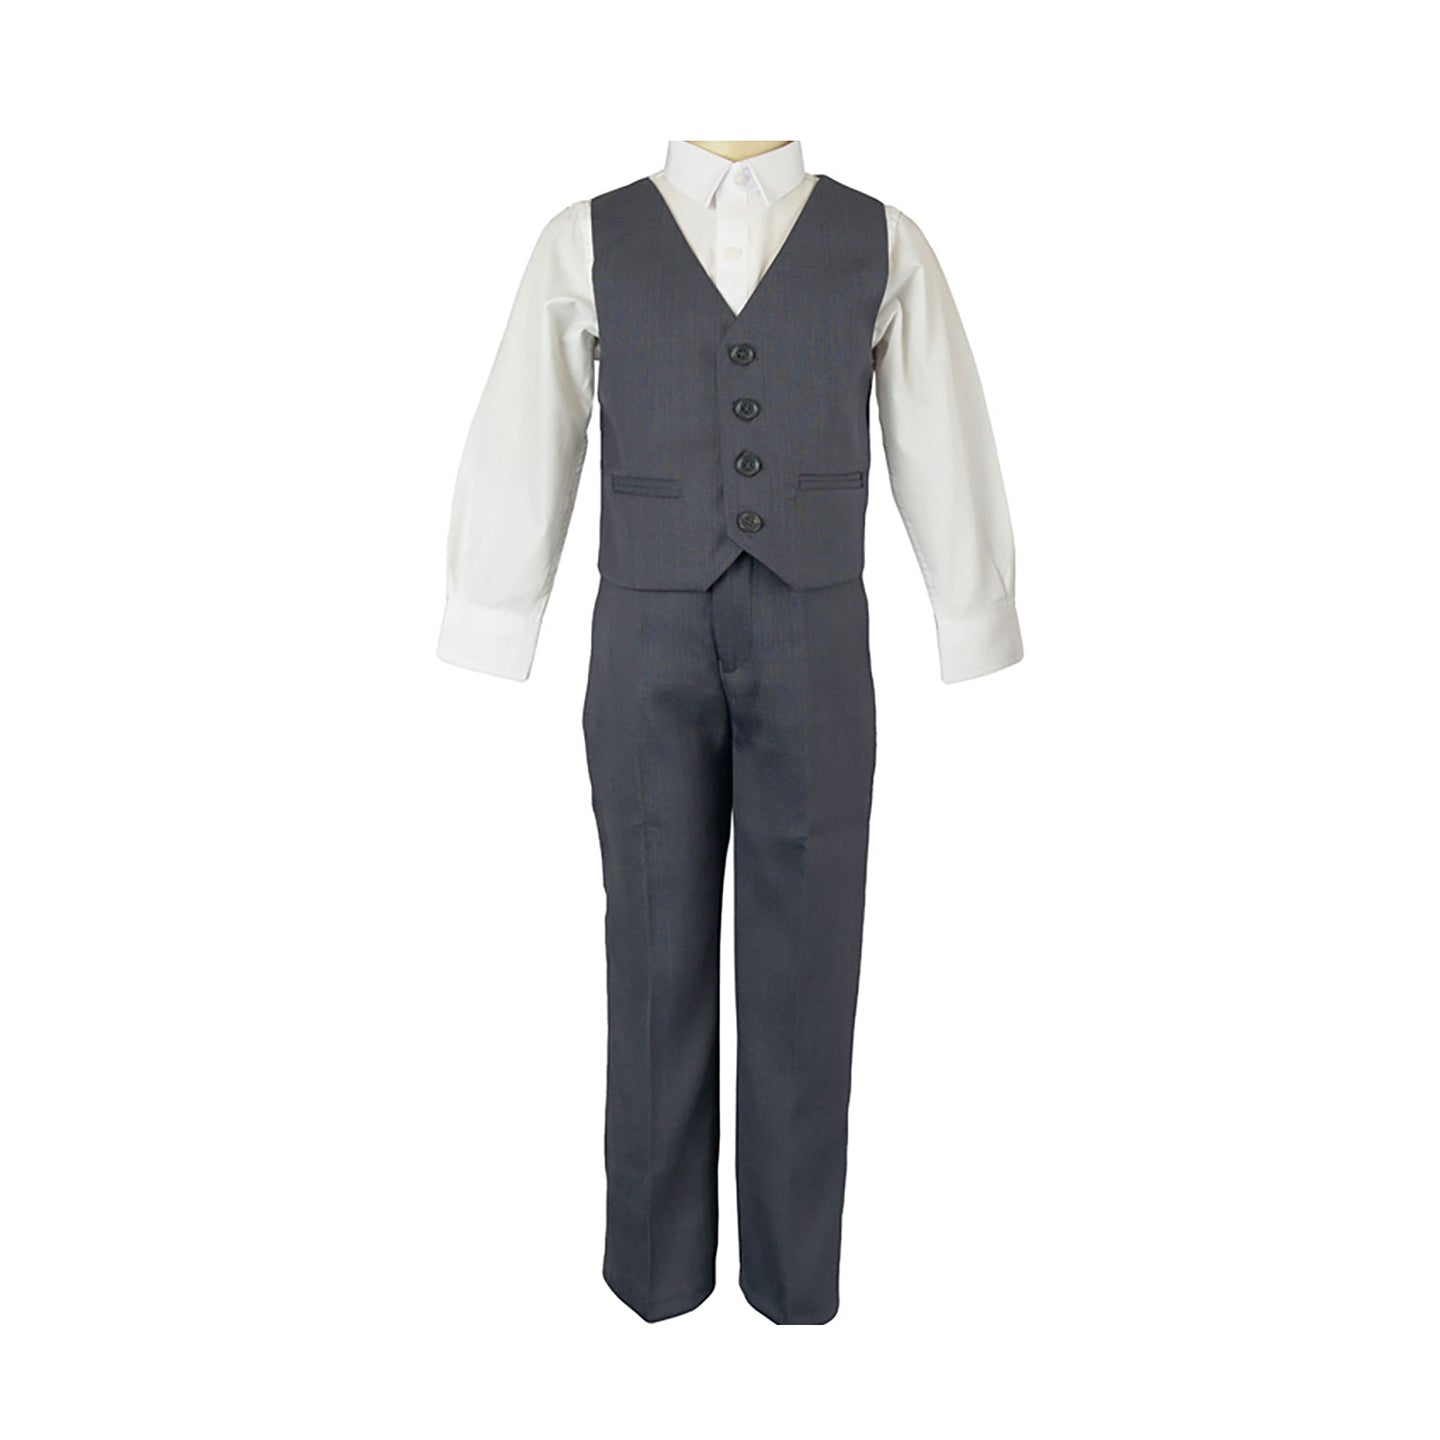 Boys' Formal Grey Suit, 3 Piece Set (size 6 months to 7 years)